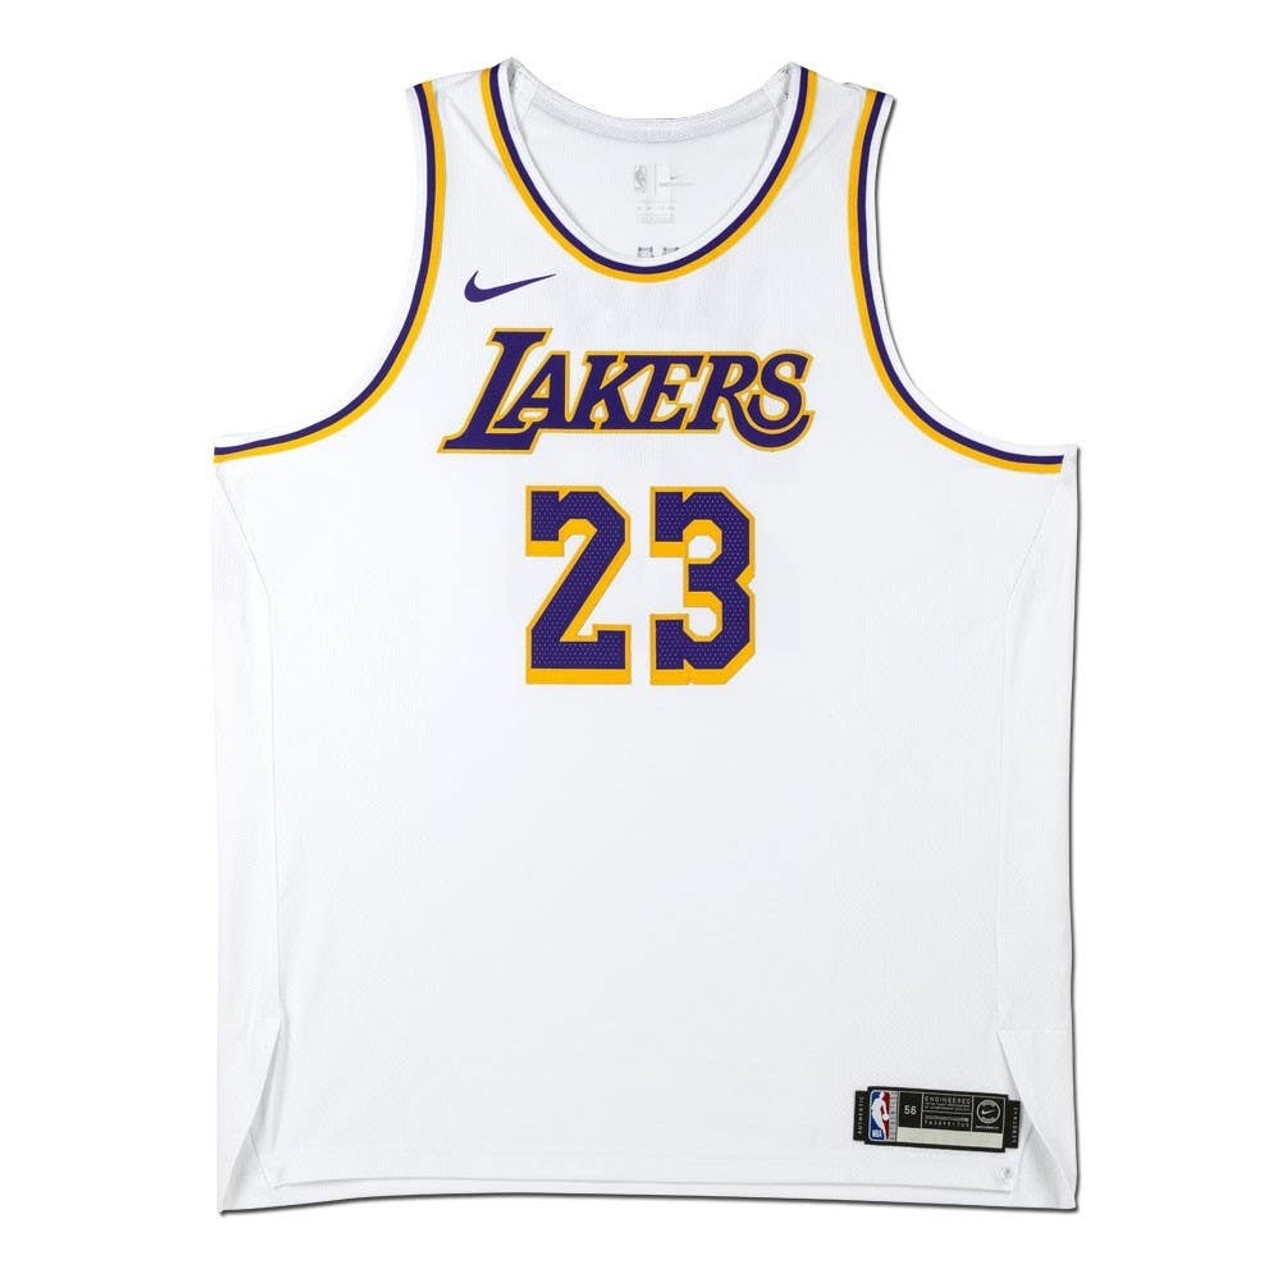 lebron official jersey